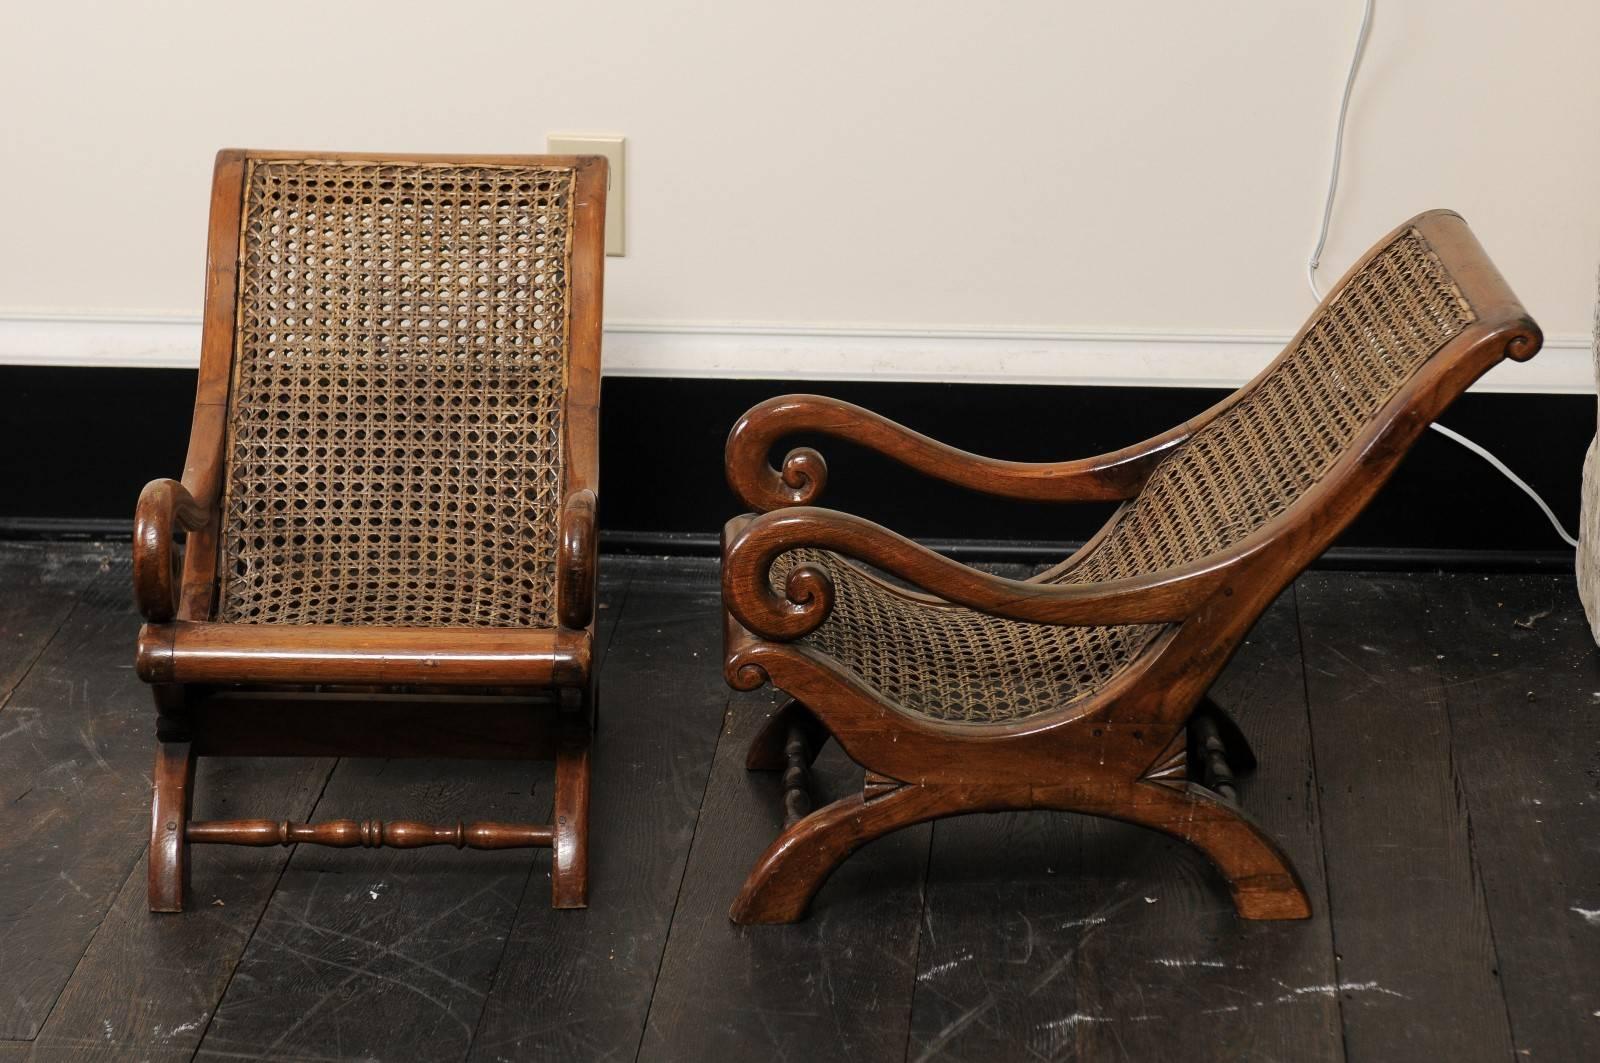 English 19th C. Children's Teak & Cane Chairs -Great Decor Accents or Display! For Sale 2